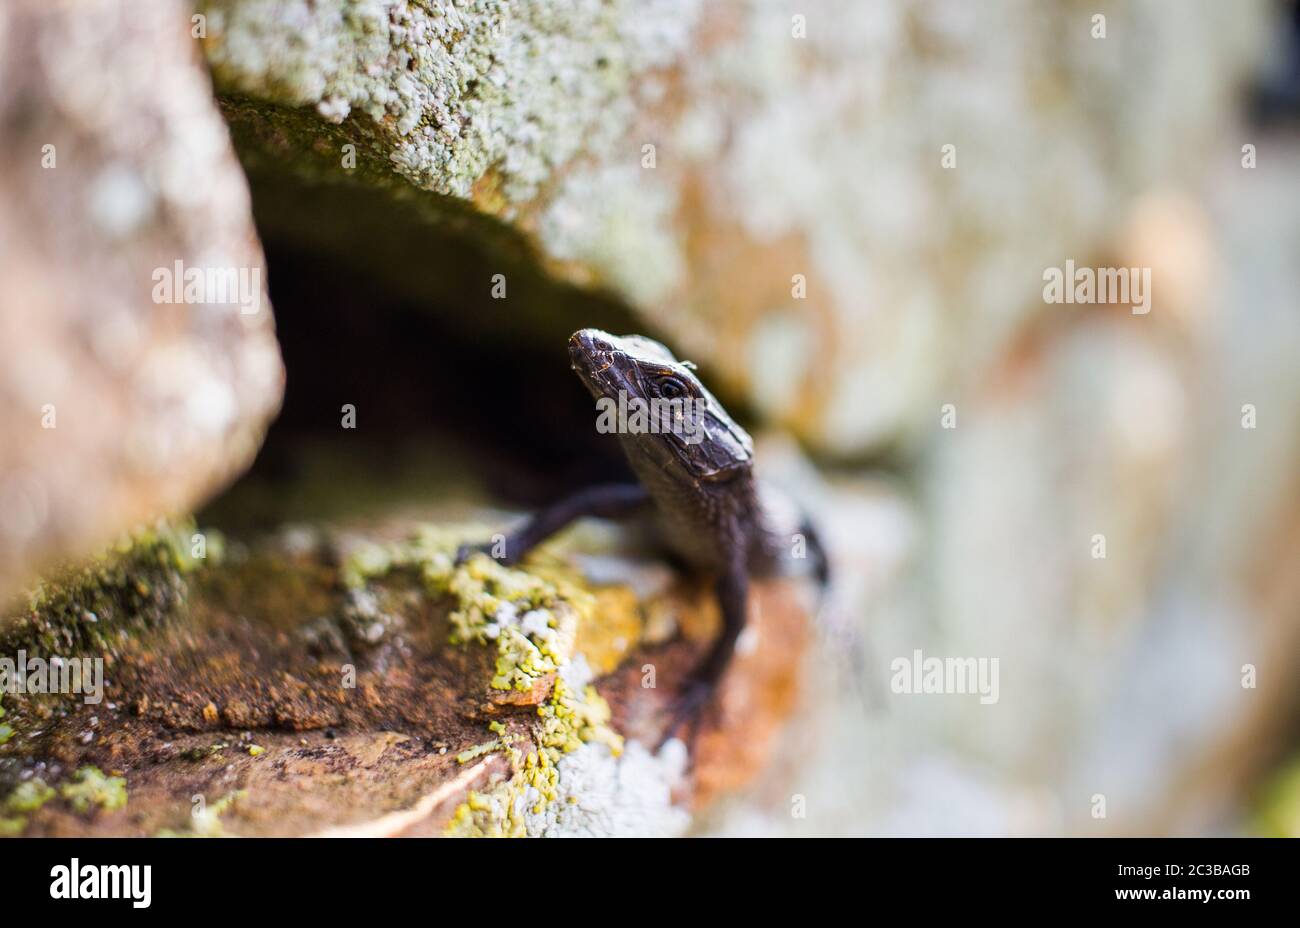 Black girdled lizard in a lichen covered crag Stock Photo